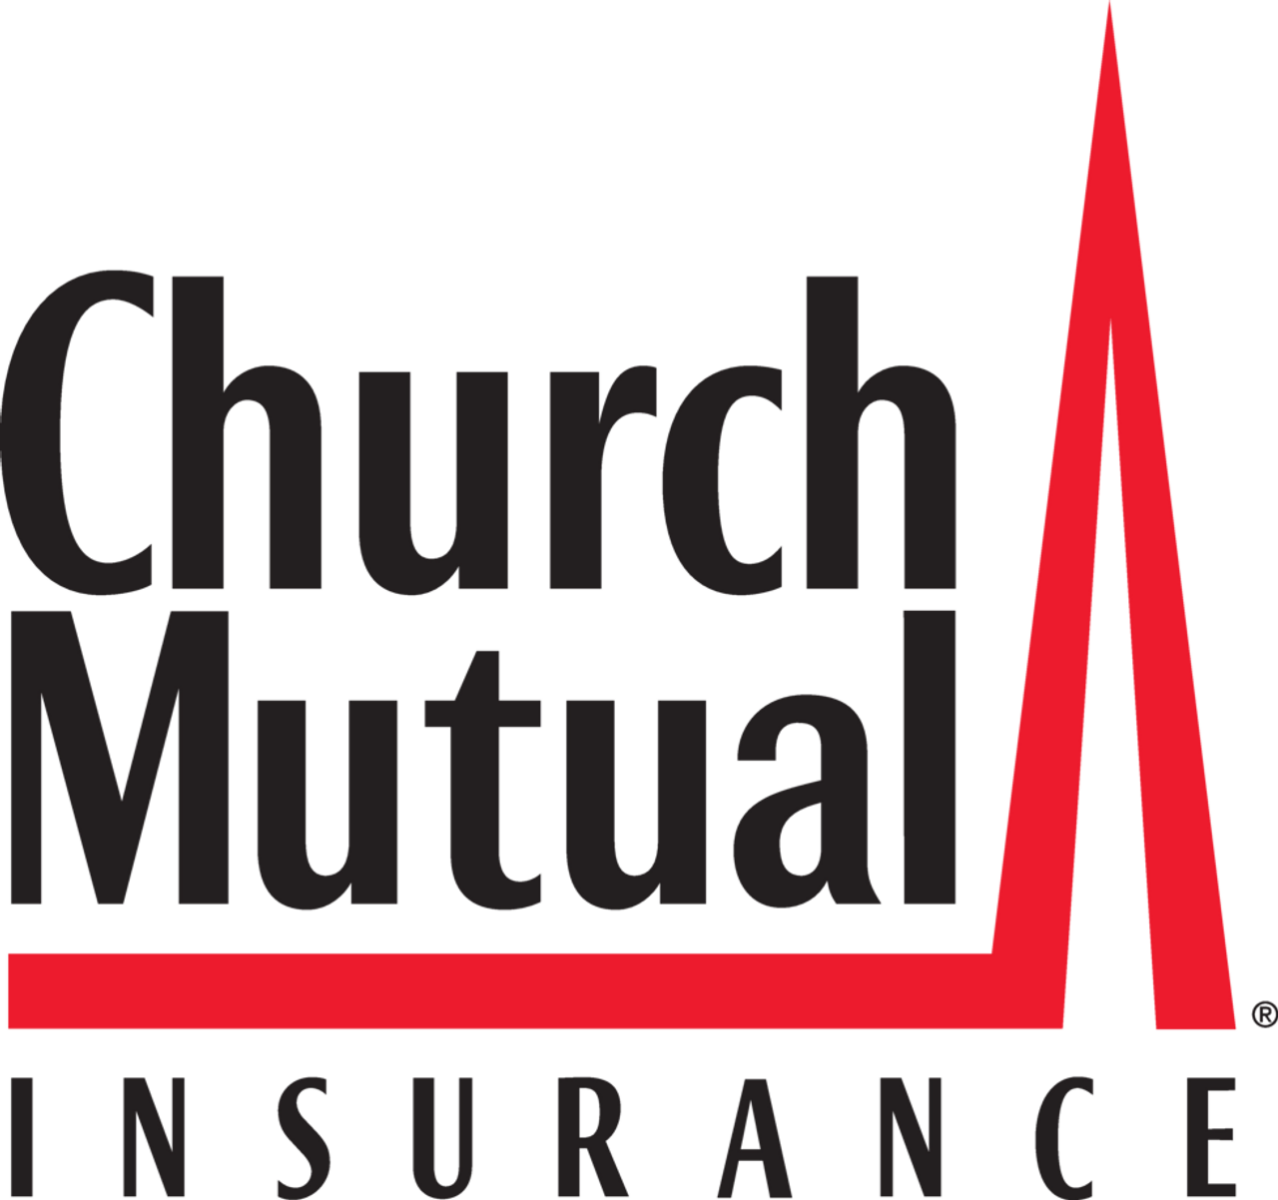 Church Mutual extends voluntary retirement incentive to eligible employees